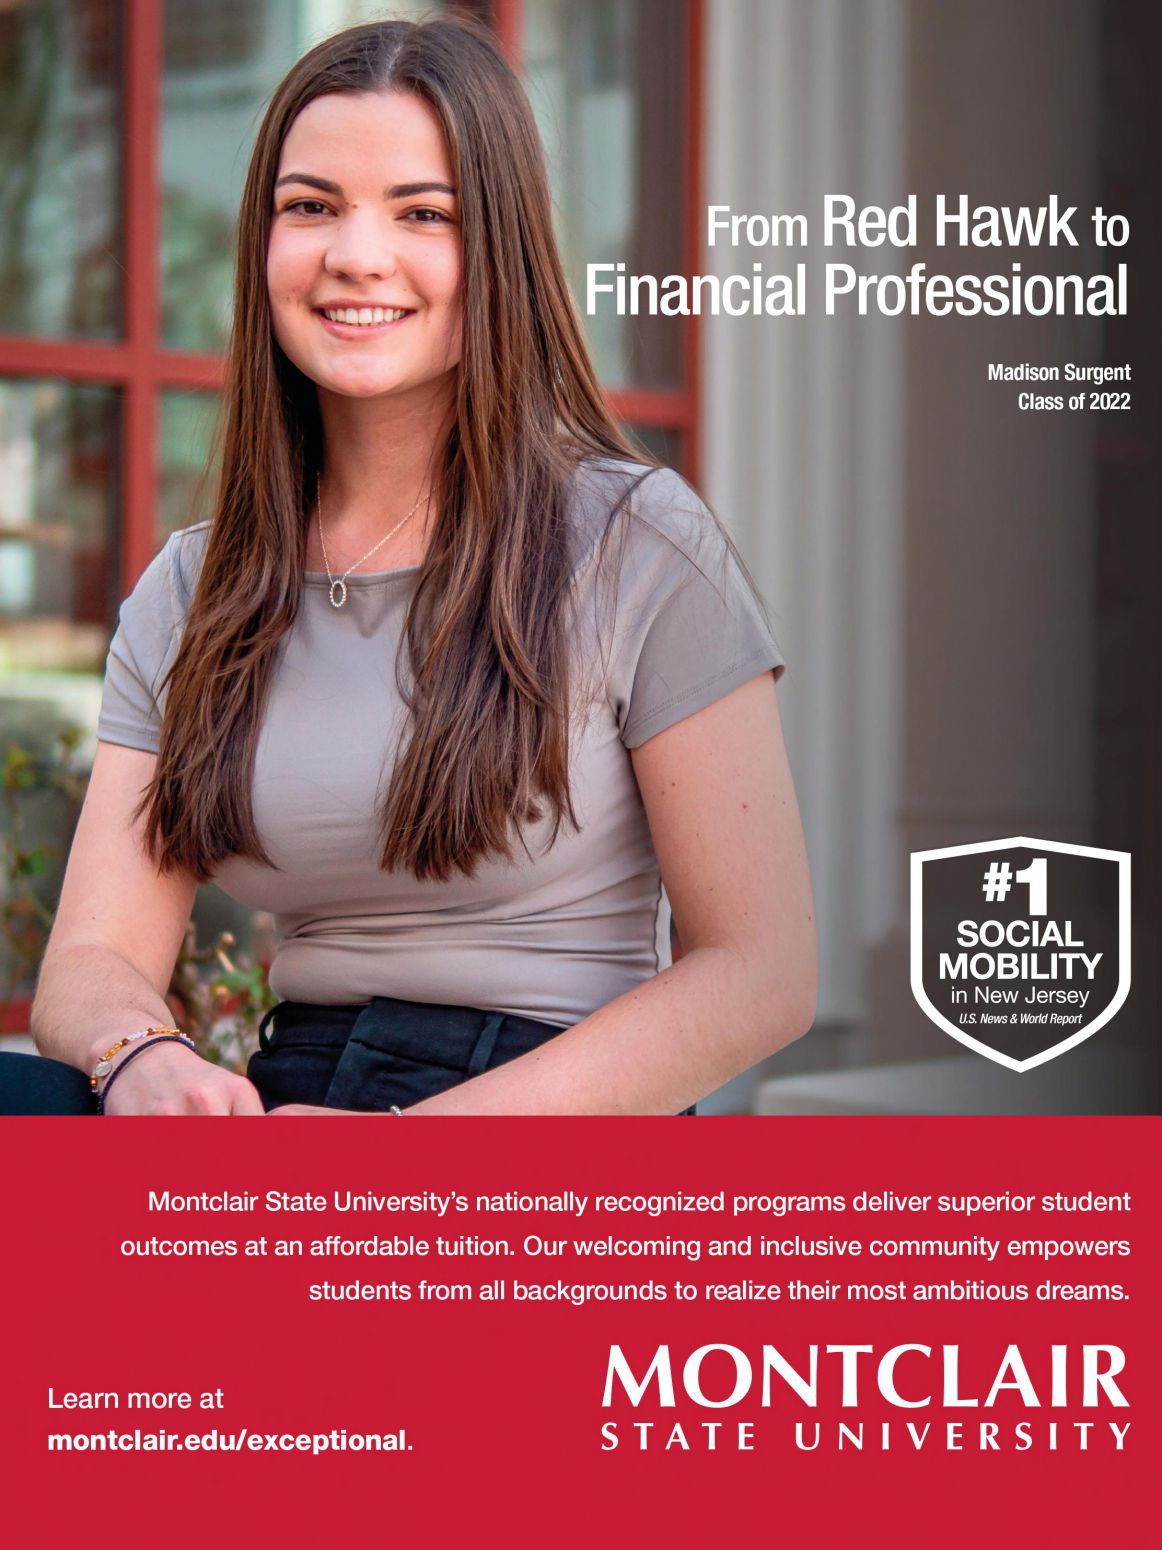 From Red Hawk to Financial Professional